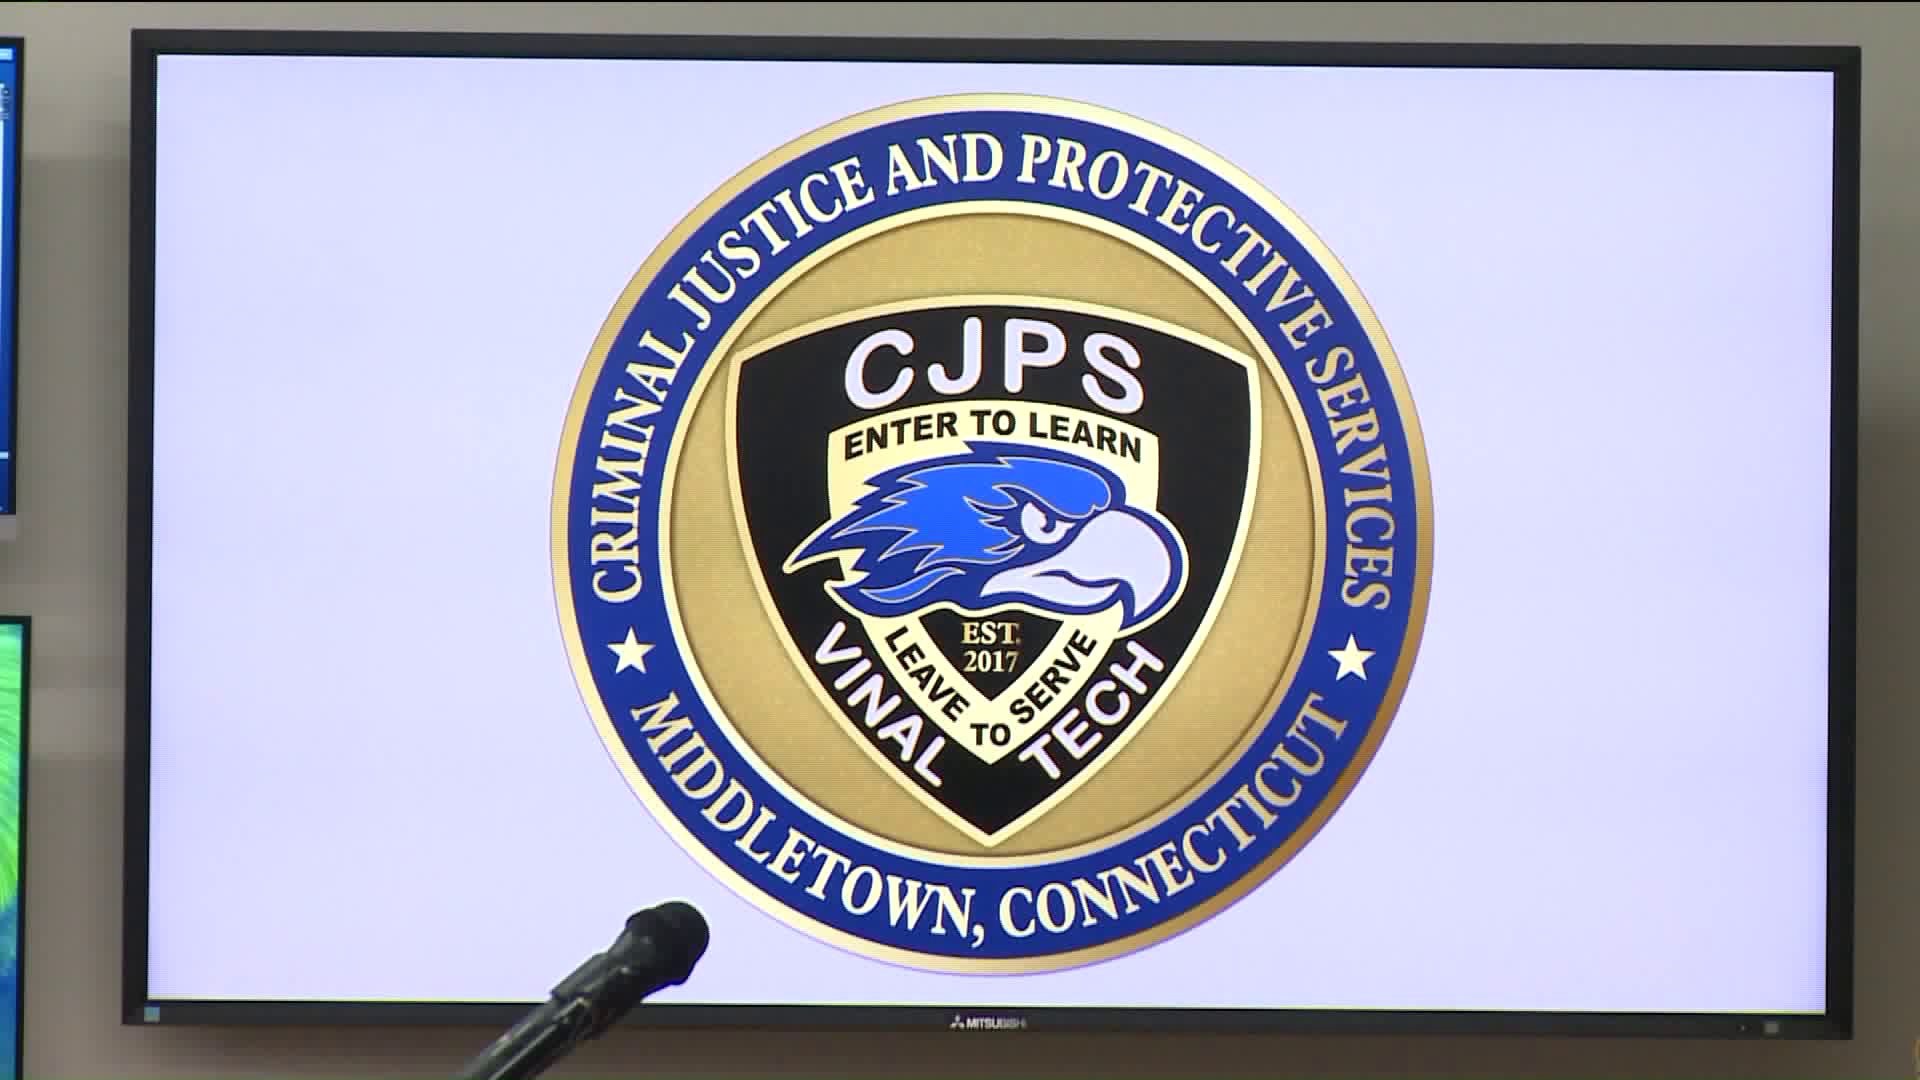 Middletown technical high school makes history, unveils emergency operations center